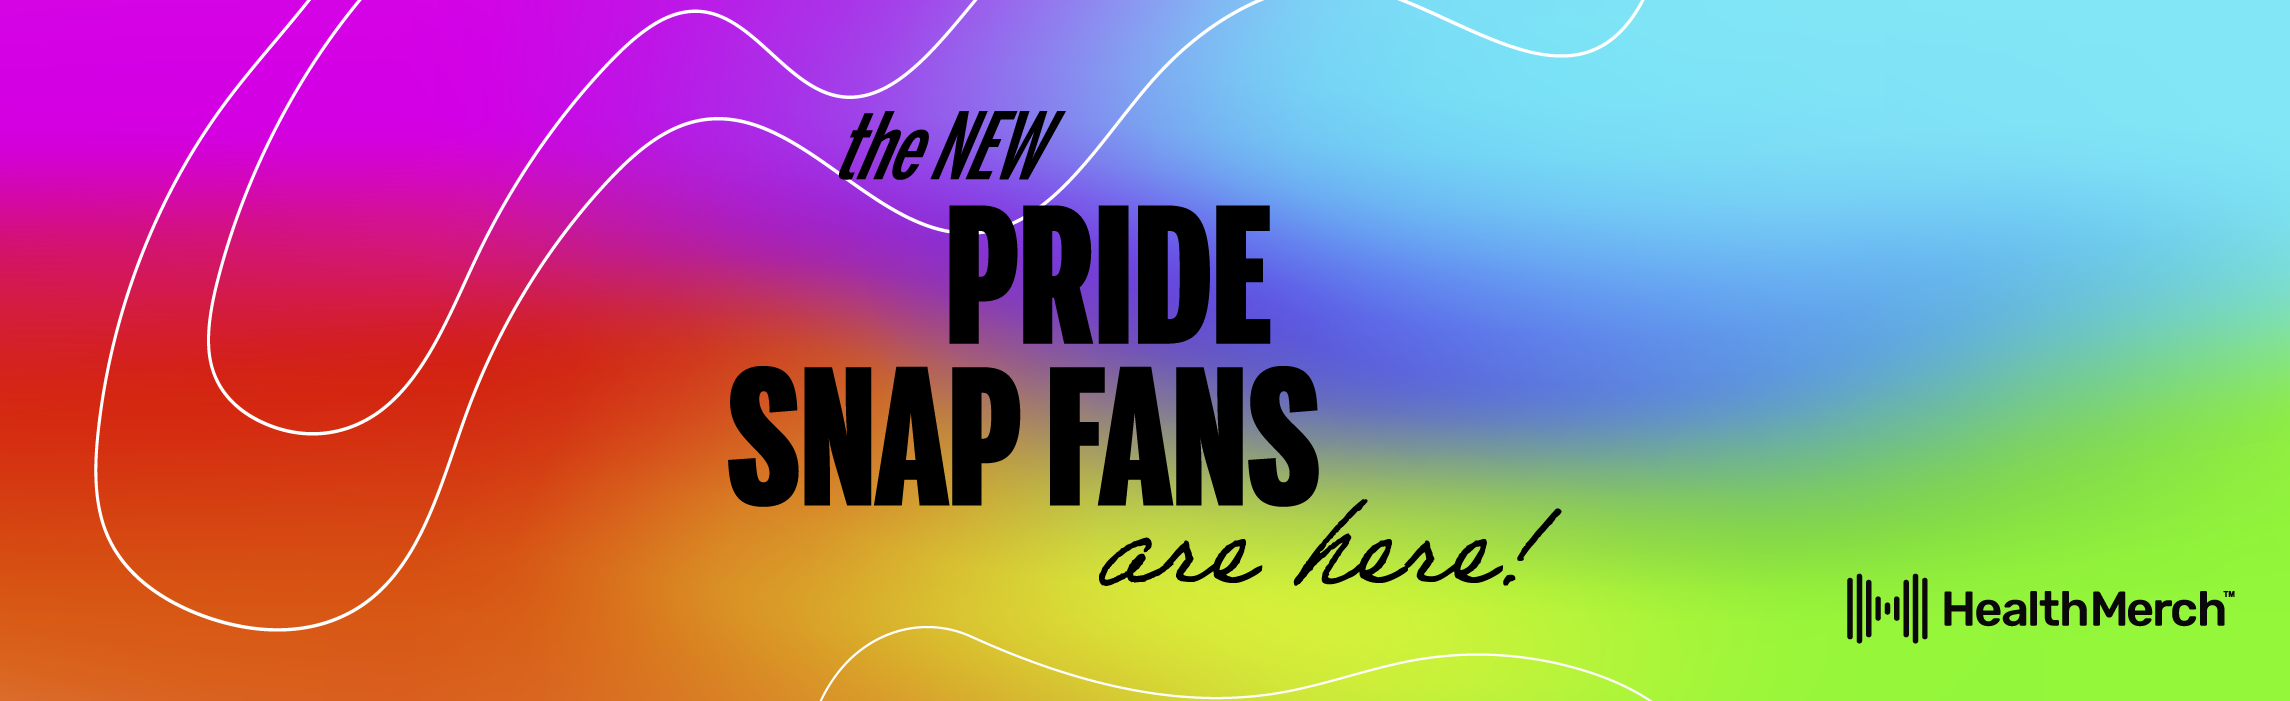 Discover the Magic of PRIDE Snap Fans with HealthMerch